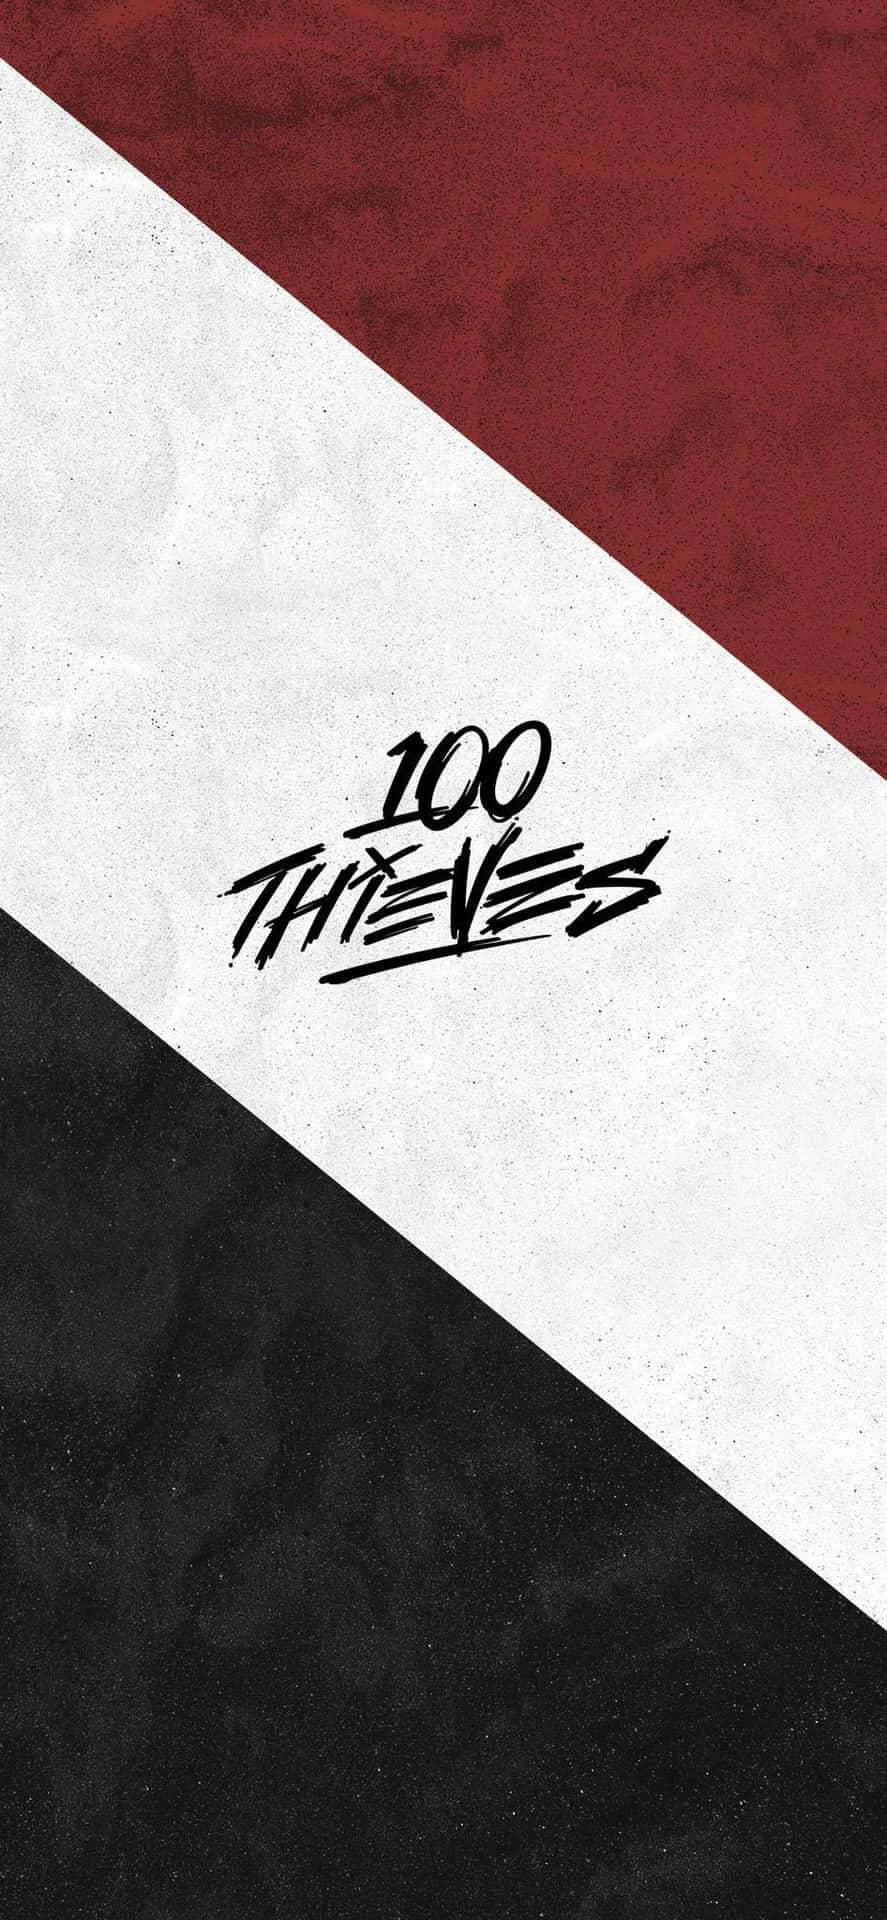 100 Thieves On A Flag Wallpaper